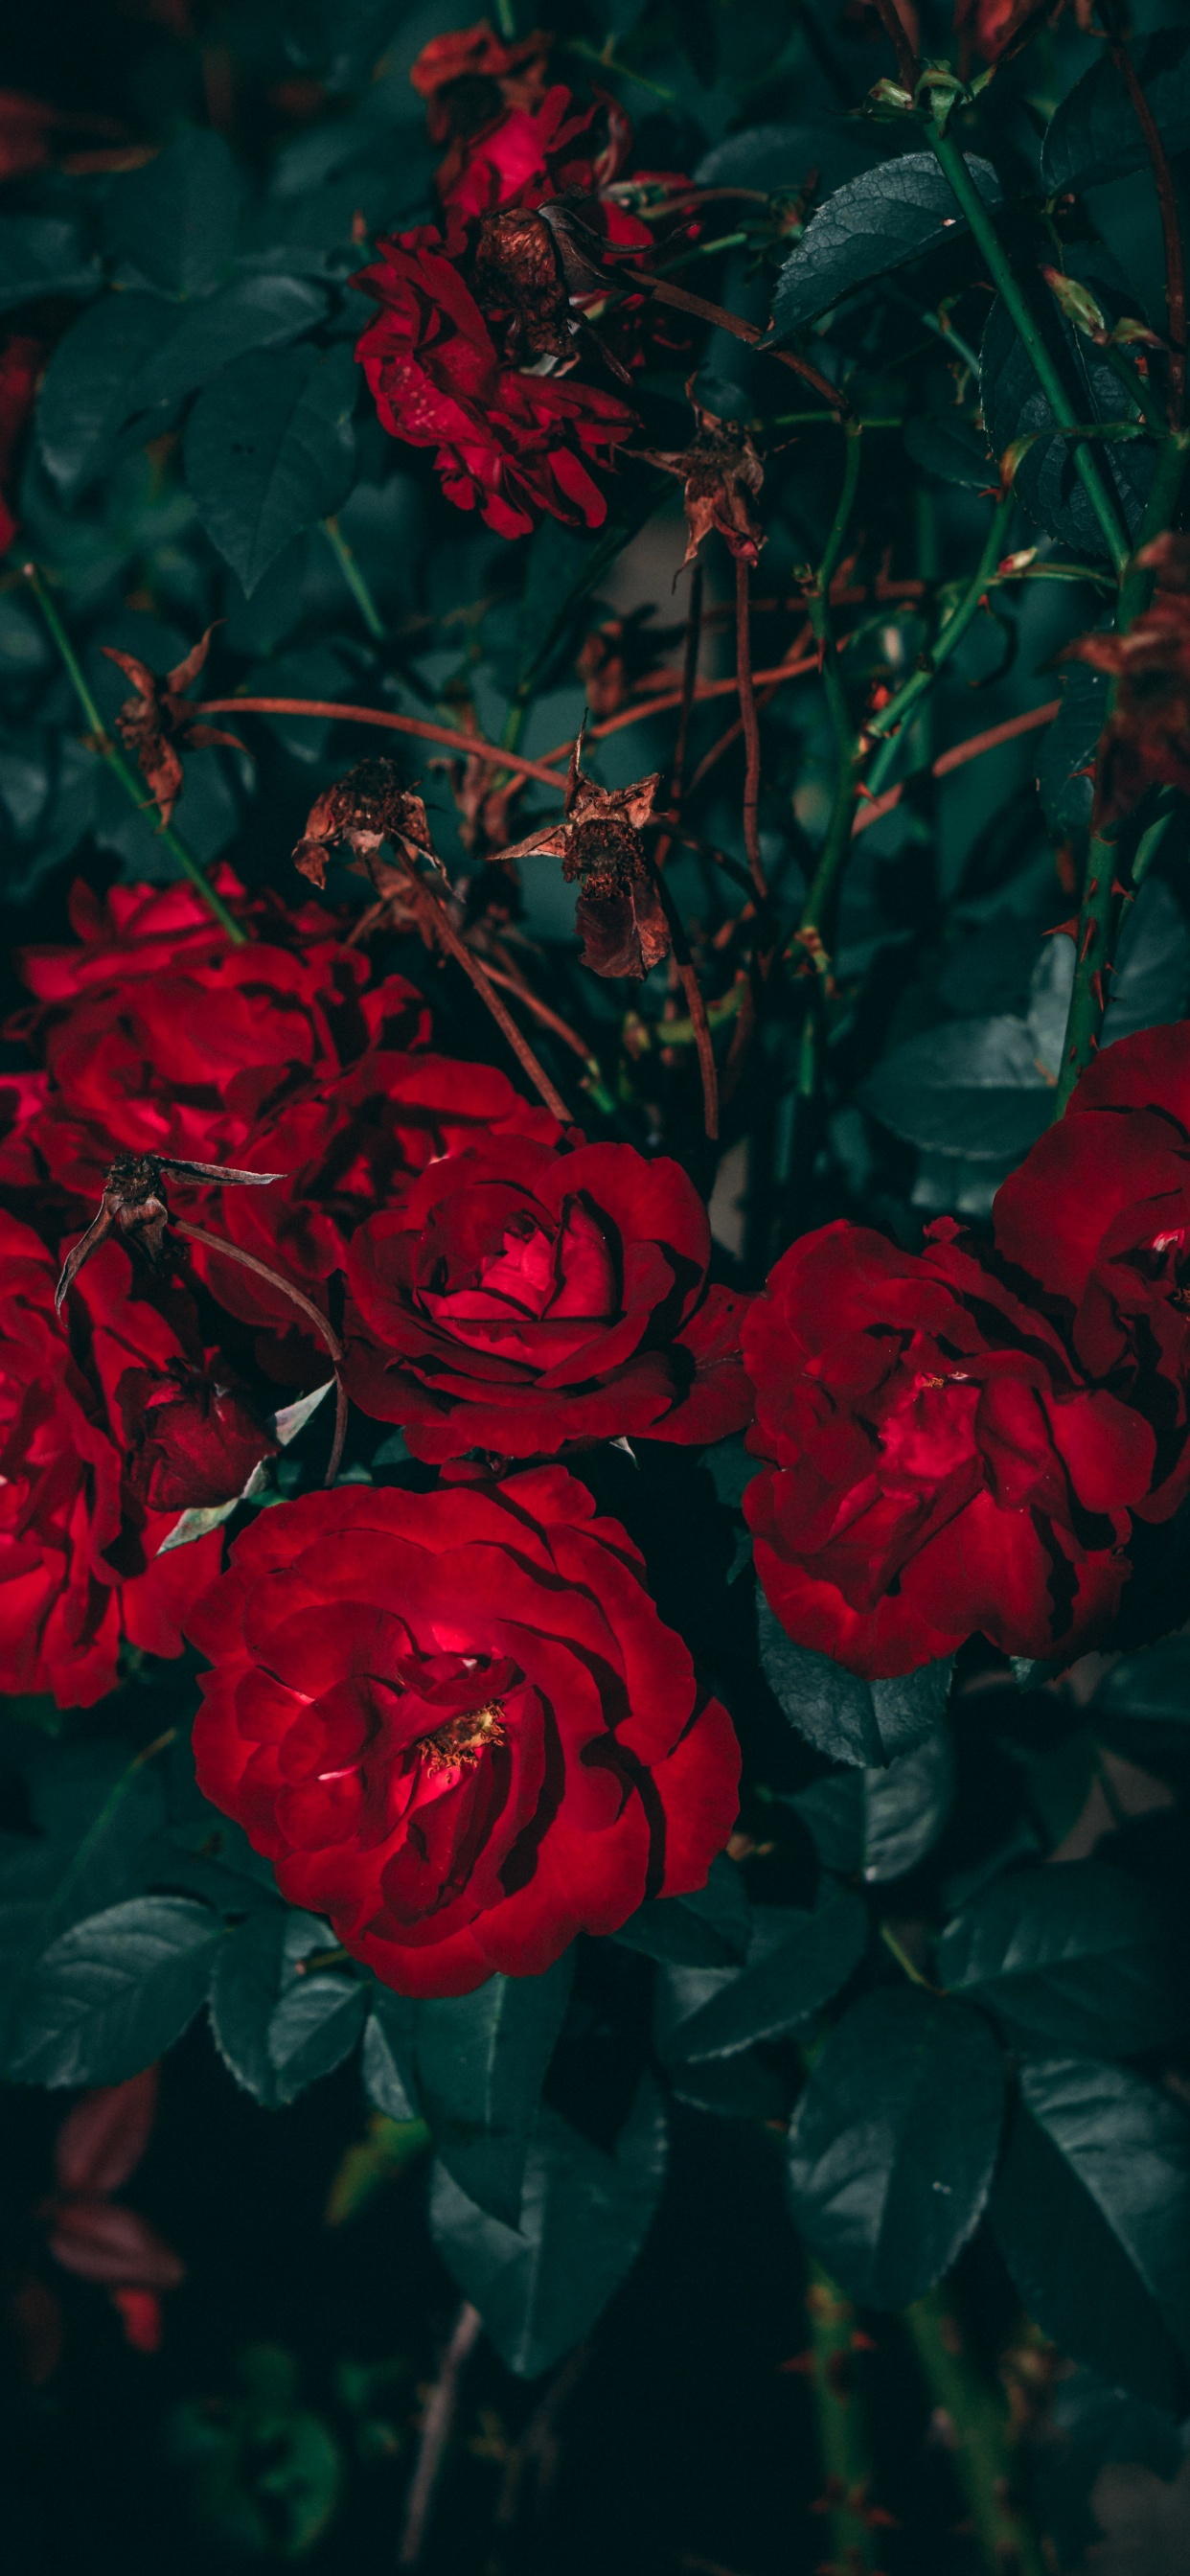 Roses Rouges en Photographie Rapprochée. Wallpaper in 1242x2688 Resolution